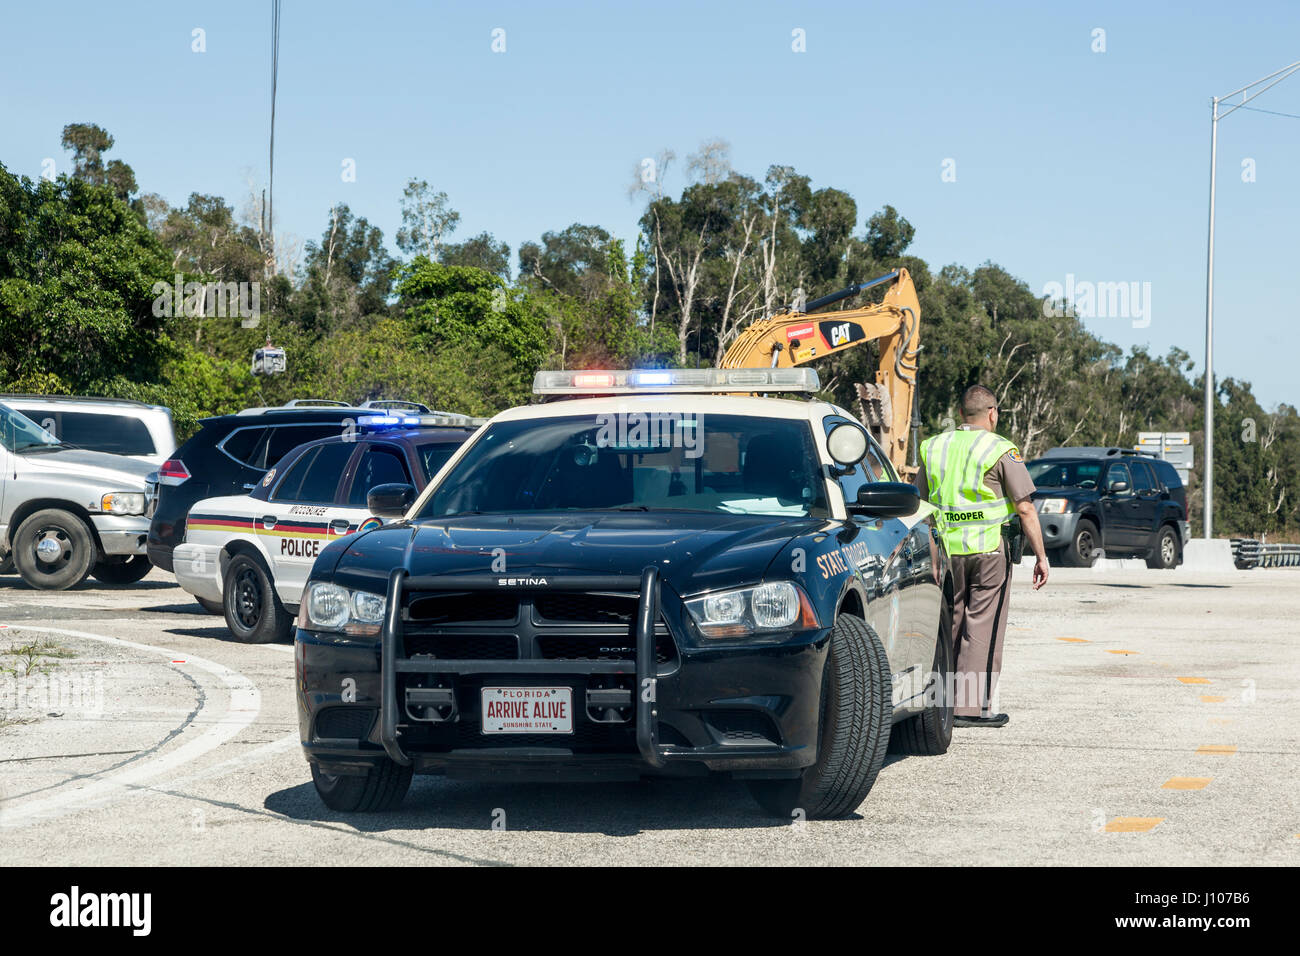 Miami, Fl, USA - March 21, 2017: Police car and officers at the highway interection in Miami. Florida, United States Stock Photo